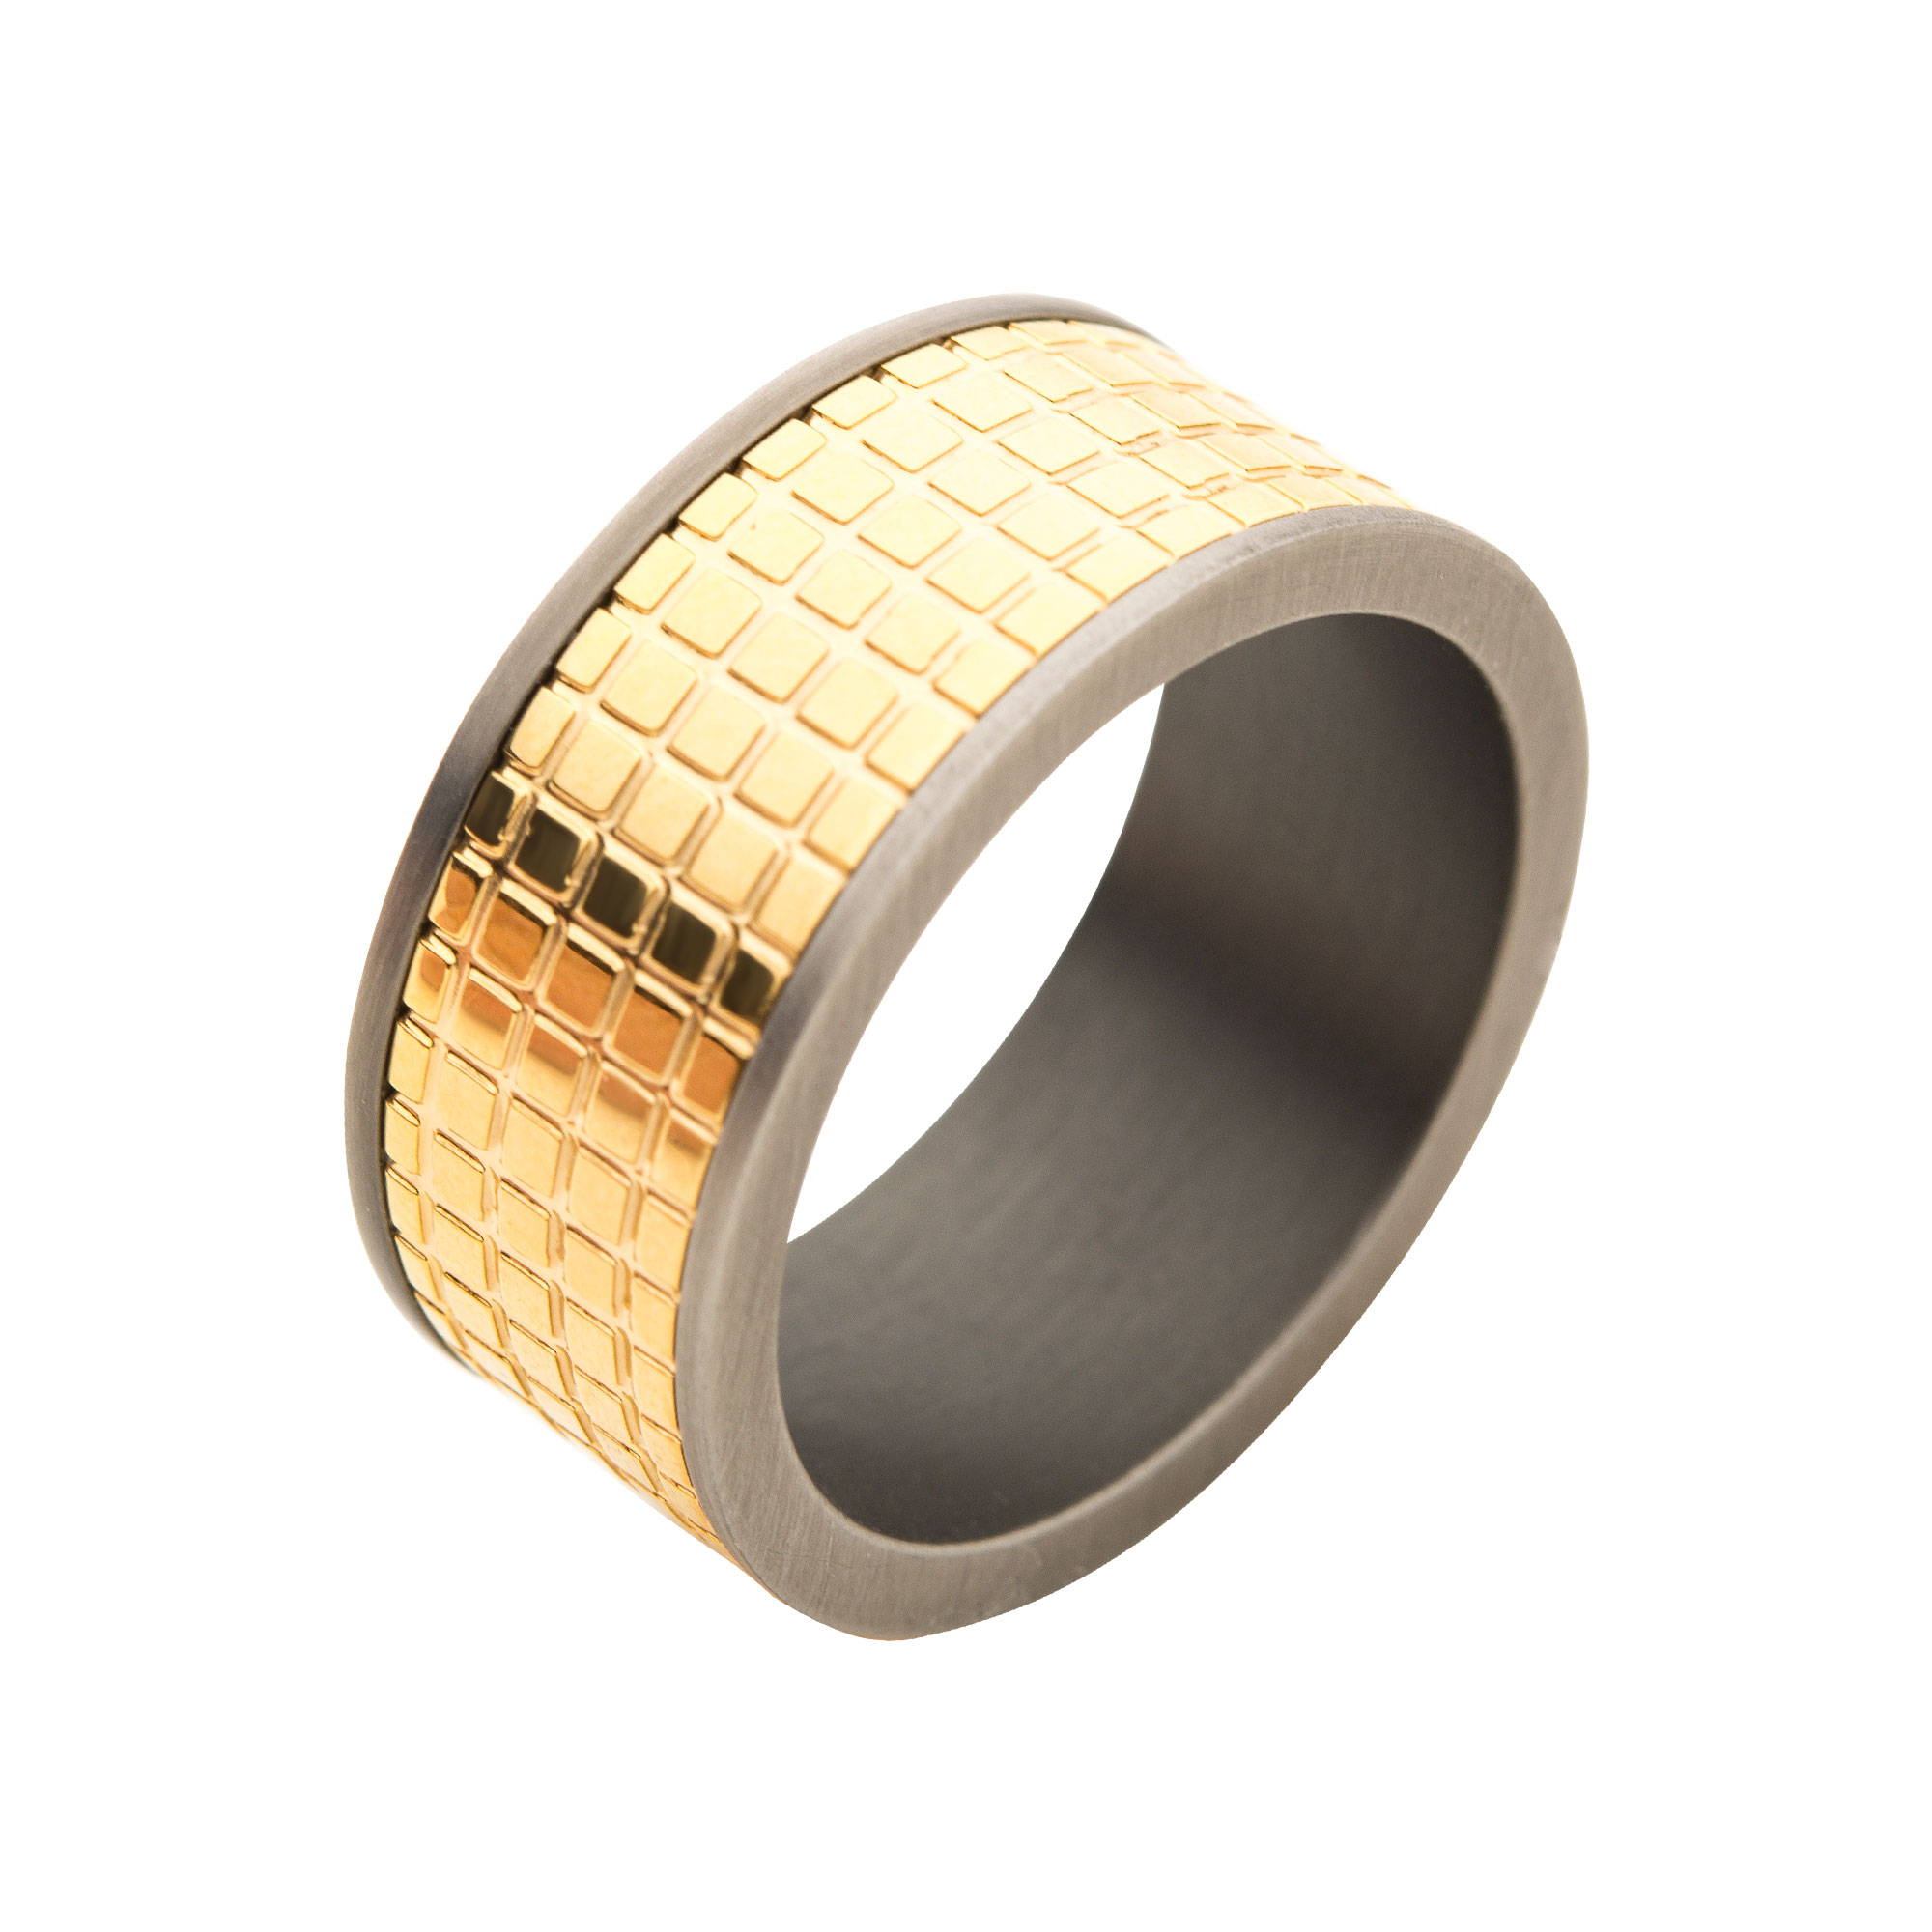 Gun Metal Plated with 18K Gold Plated Grid Inlay Ring Ken Walker Jewelers Gig Harbor, WA